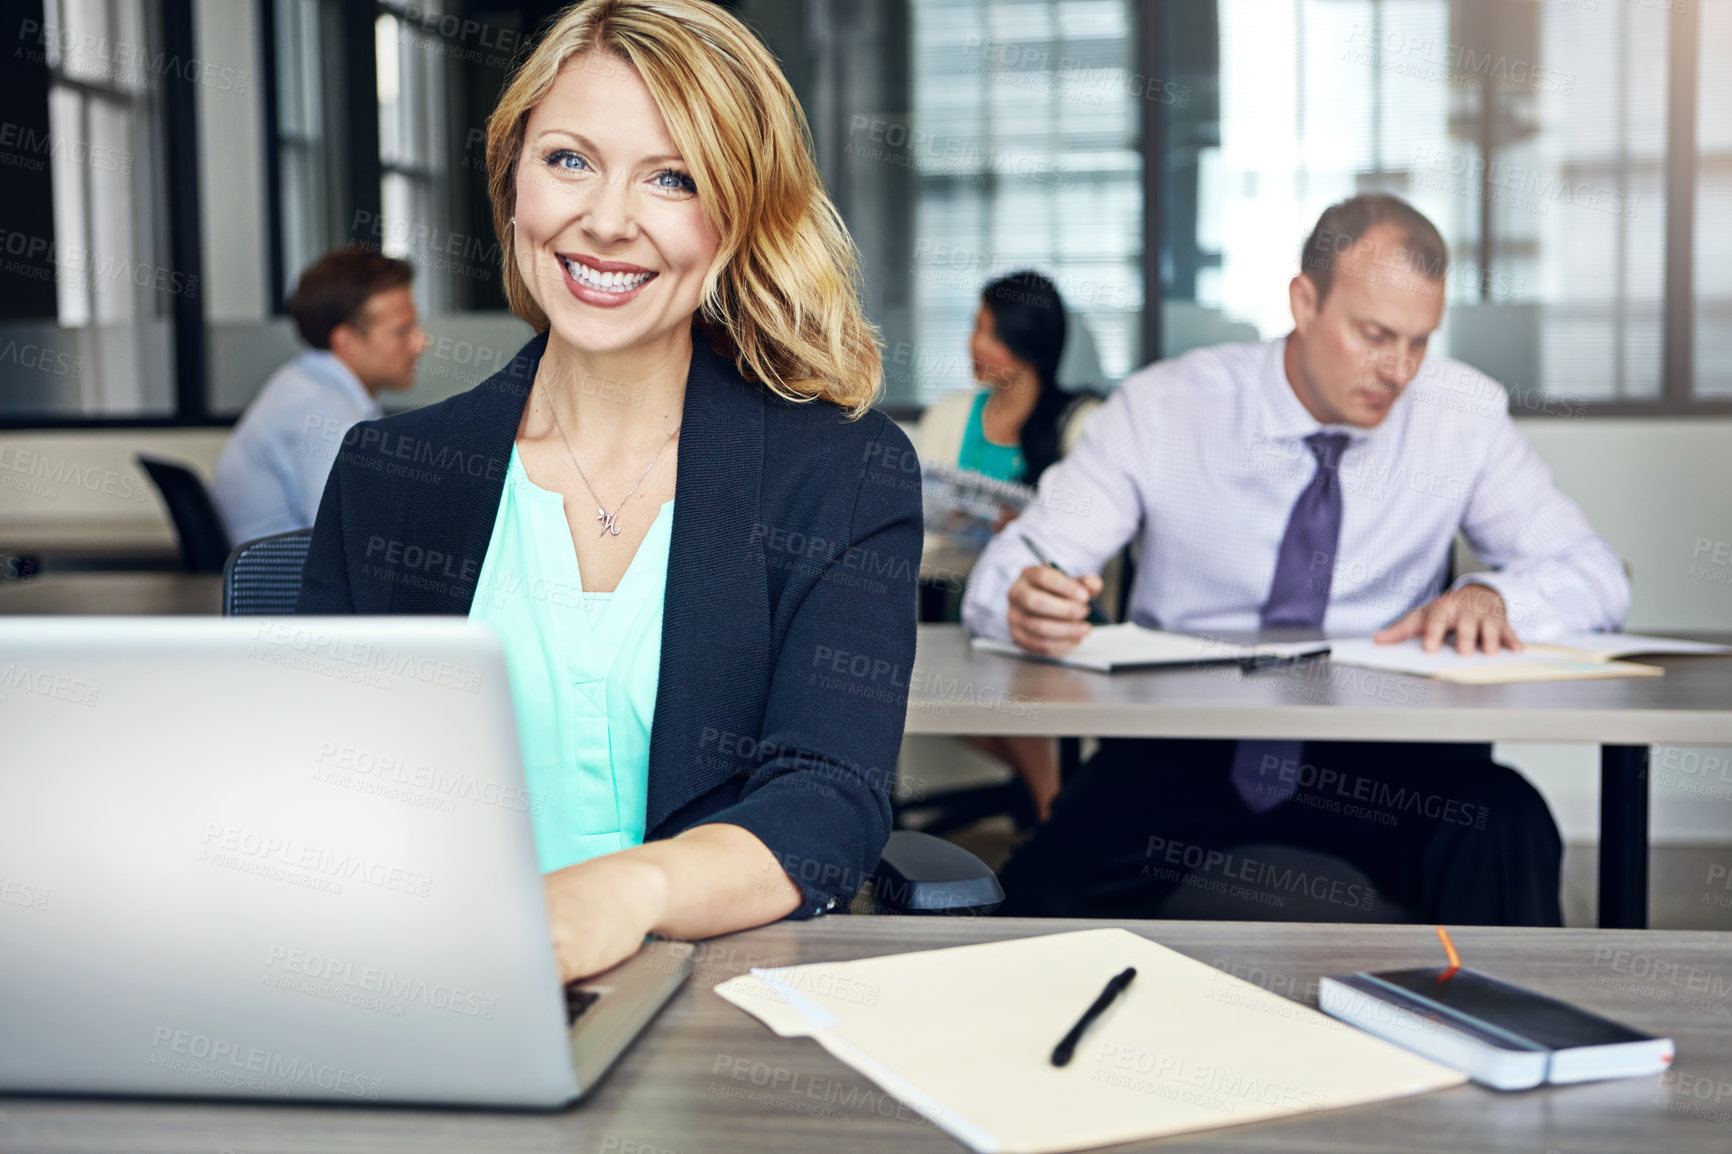 Buy stock photo Portrait of a businesswoman using a laptop at her desk with her colleagues in the background